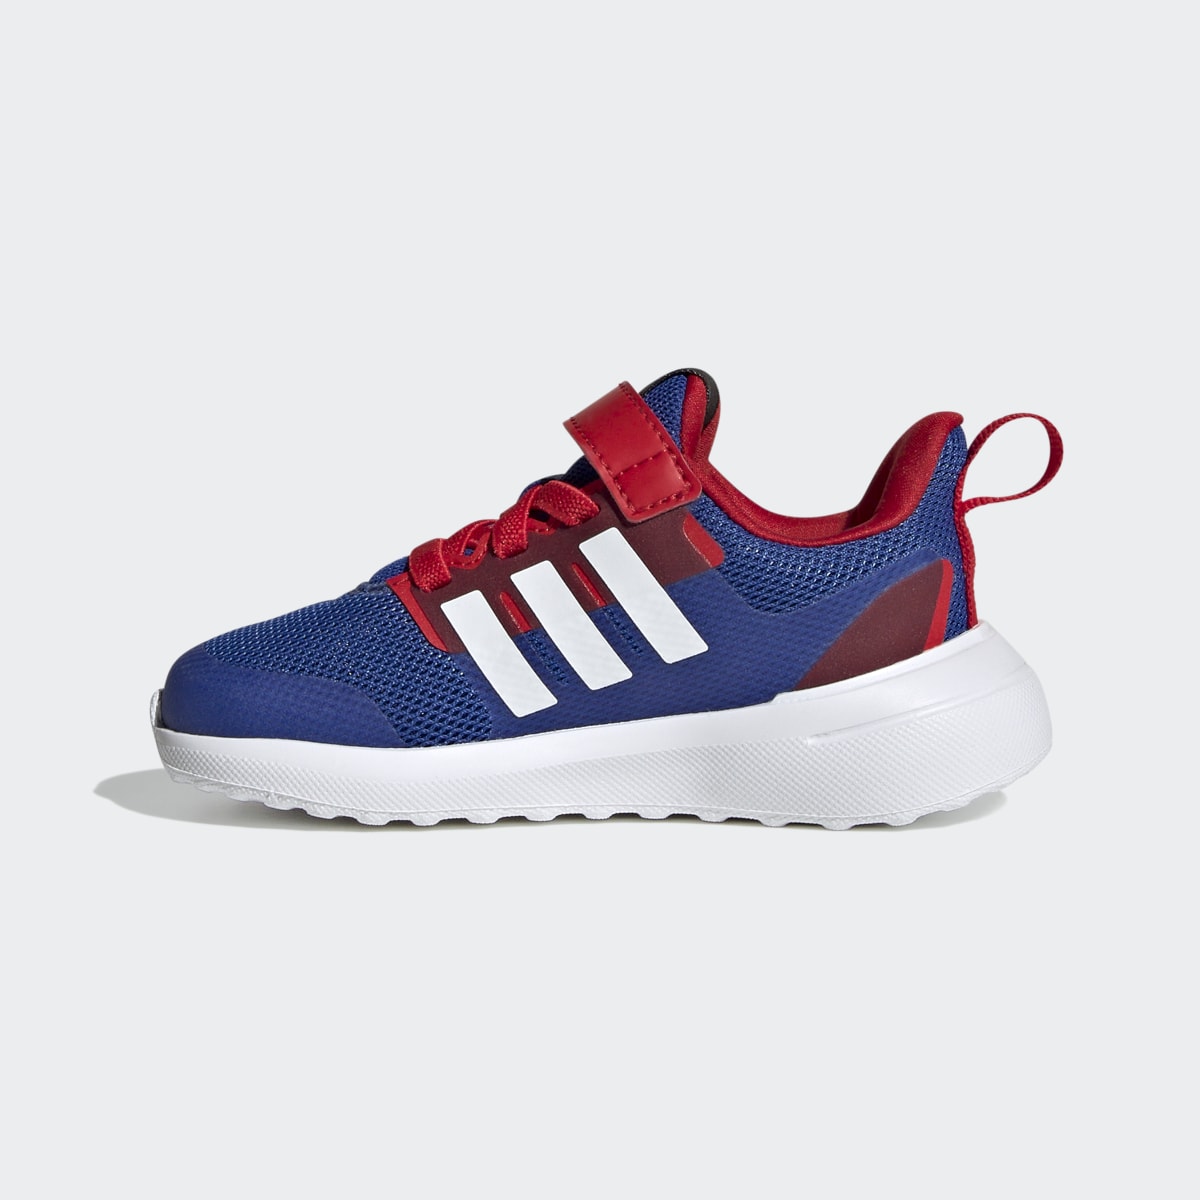 Adidas x Marvel FortaRun 2.0 Spider-Man Cloudfoam Sport Running Elastic Lace Top Strap Shoes. 7